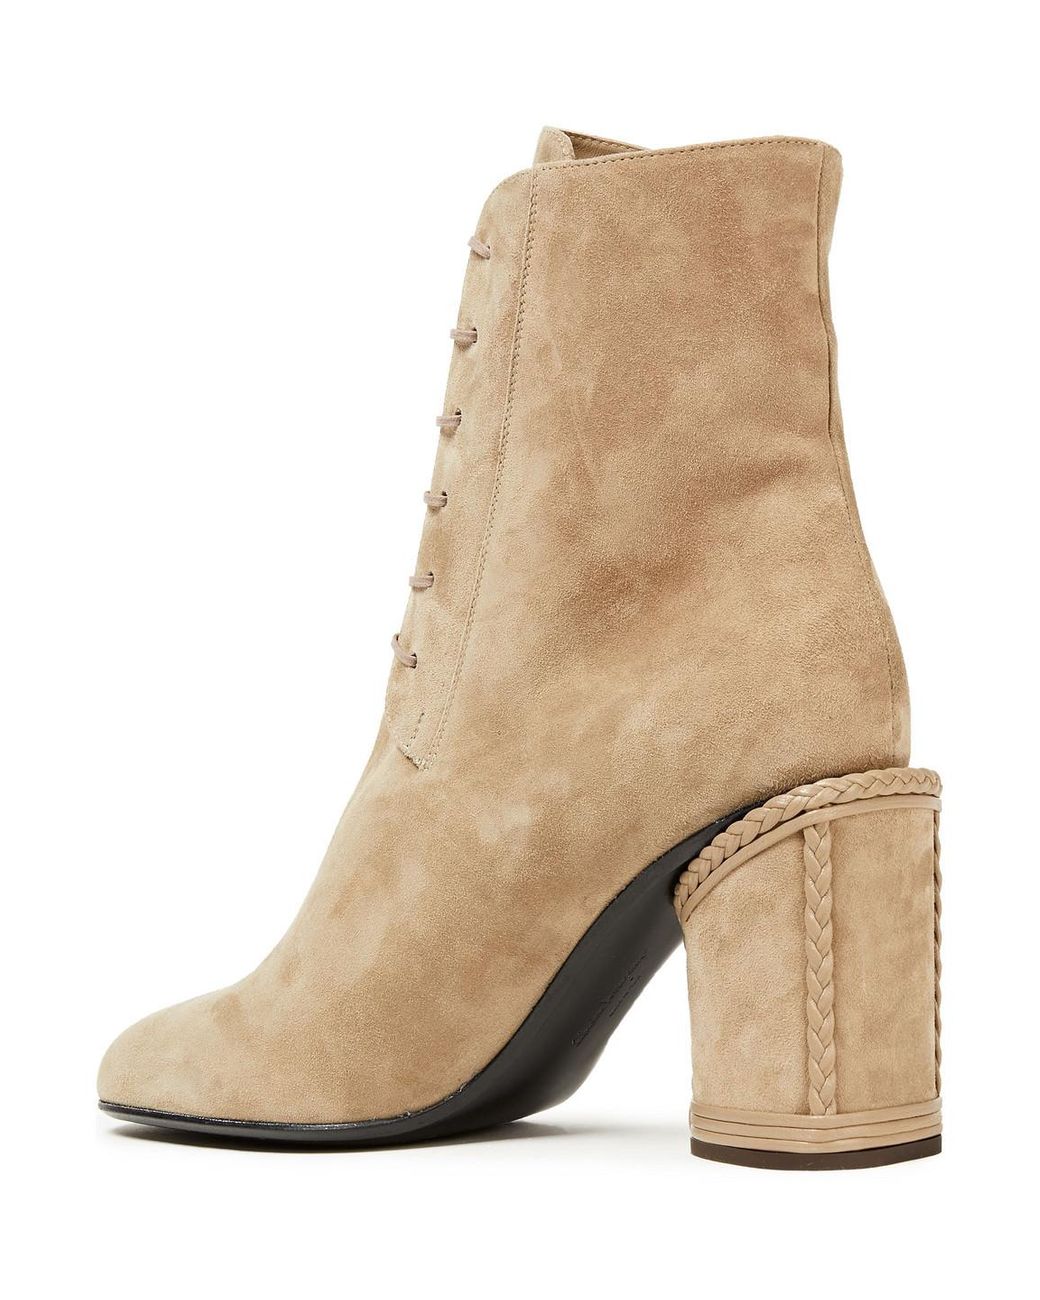 Ferragamo Chana Lace-up Suede Ankle Boots in Natural | Lyst